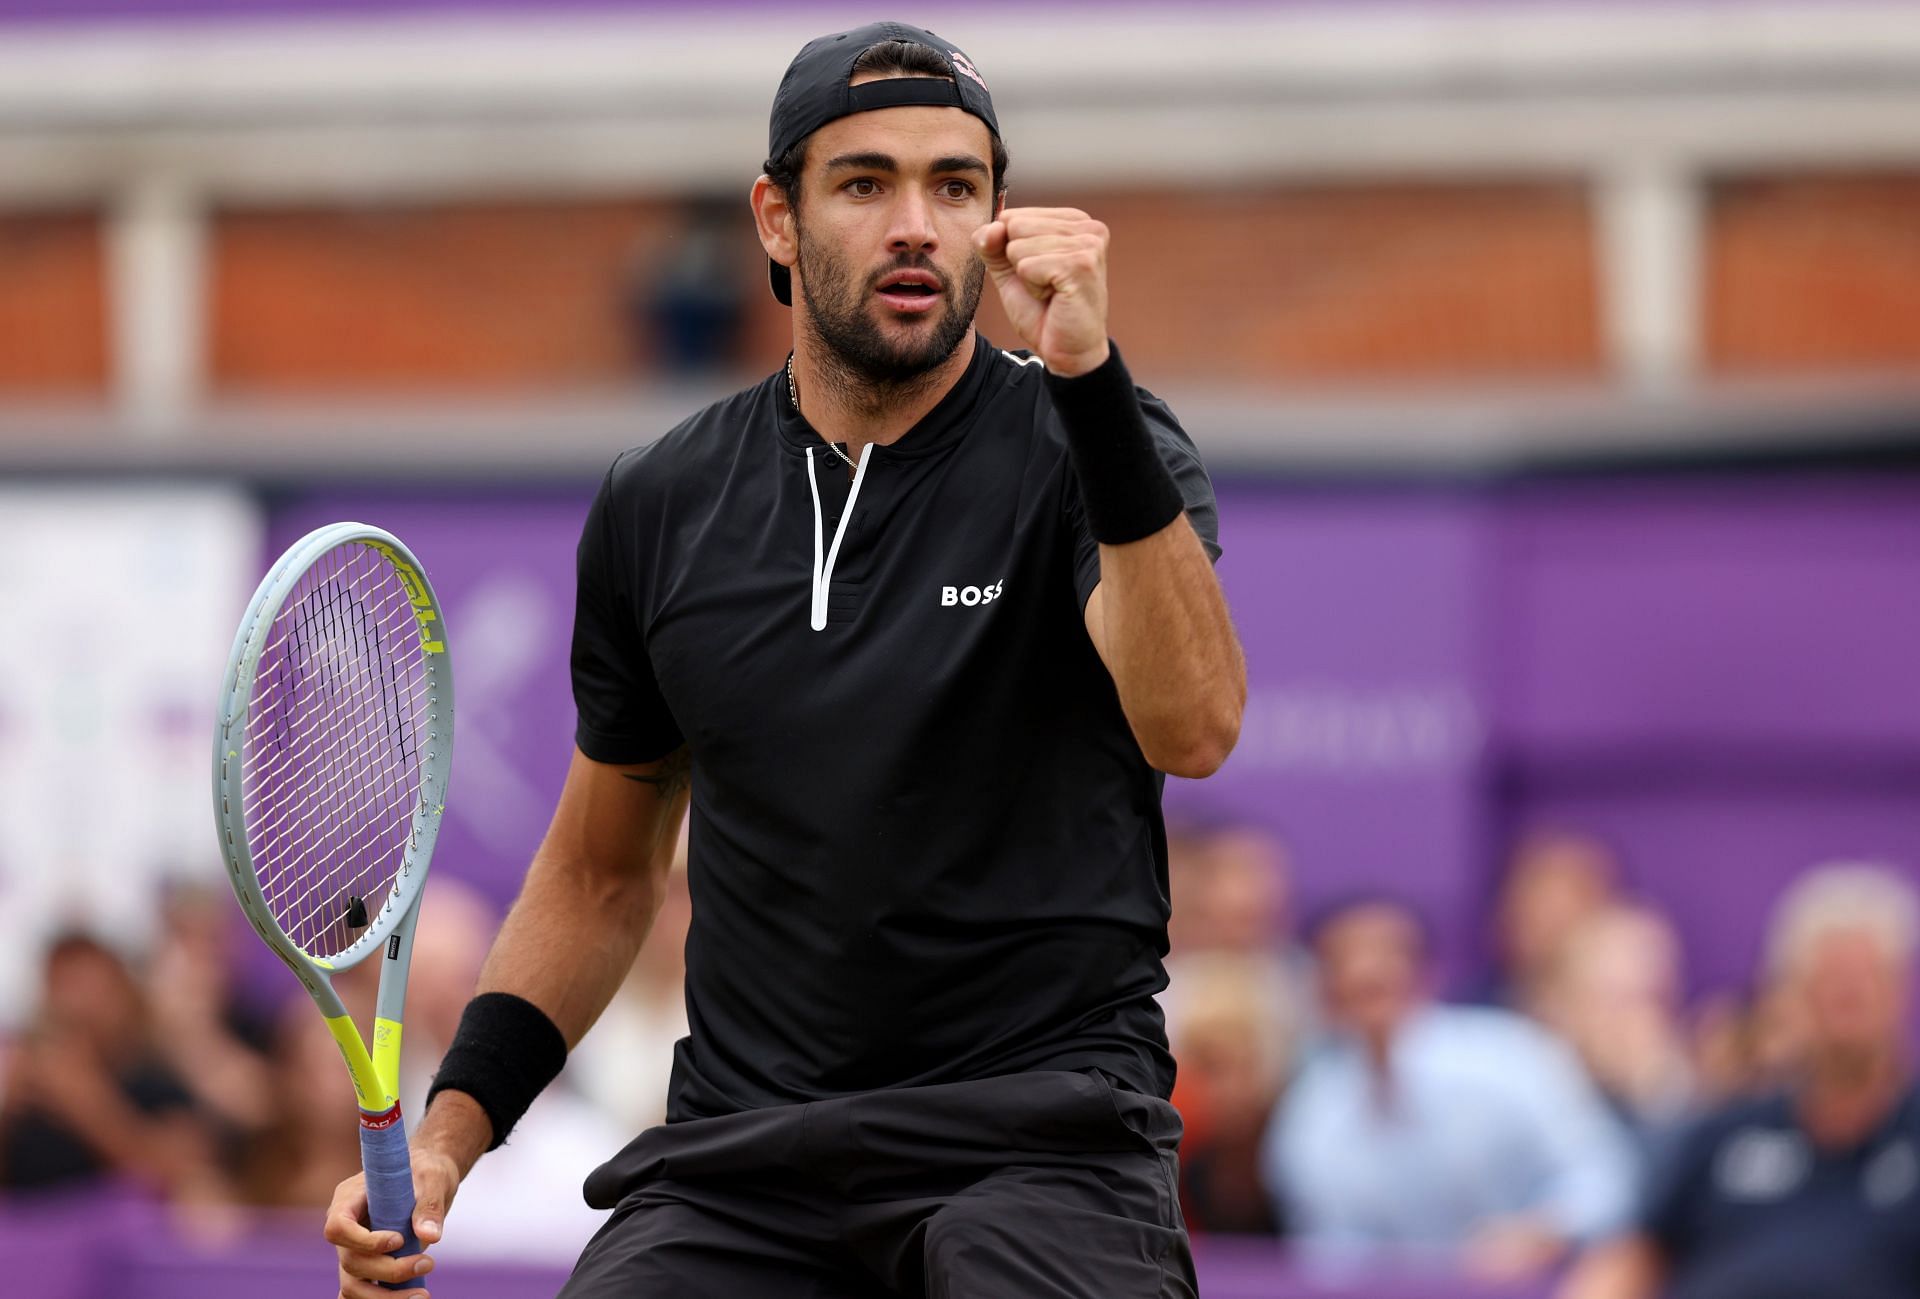 Matteo Berrettini will be in action next at the Monte-Carlo Masters